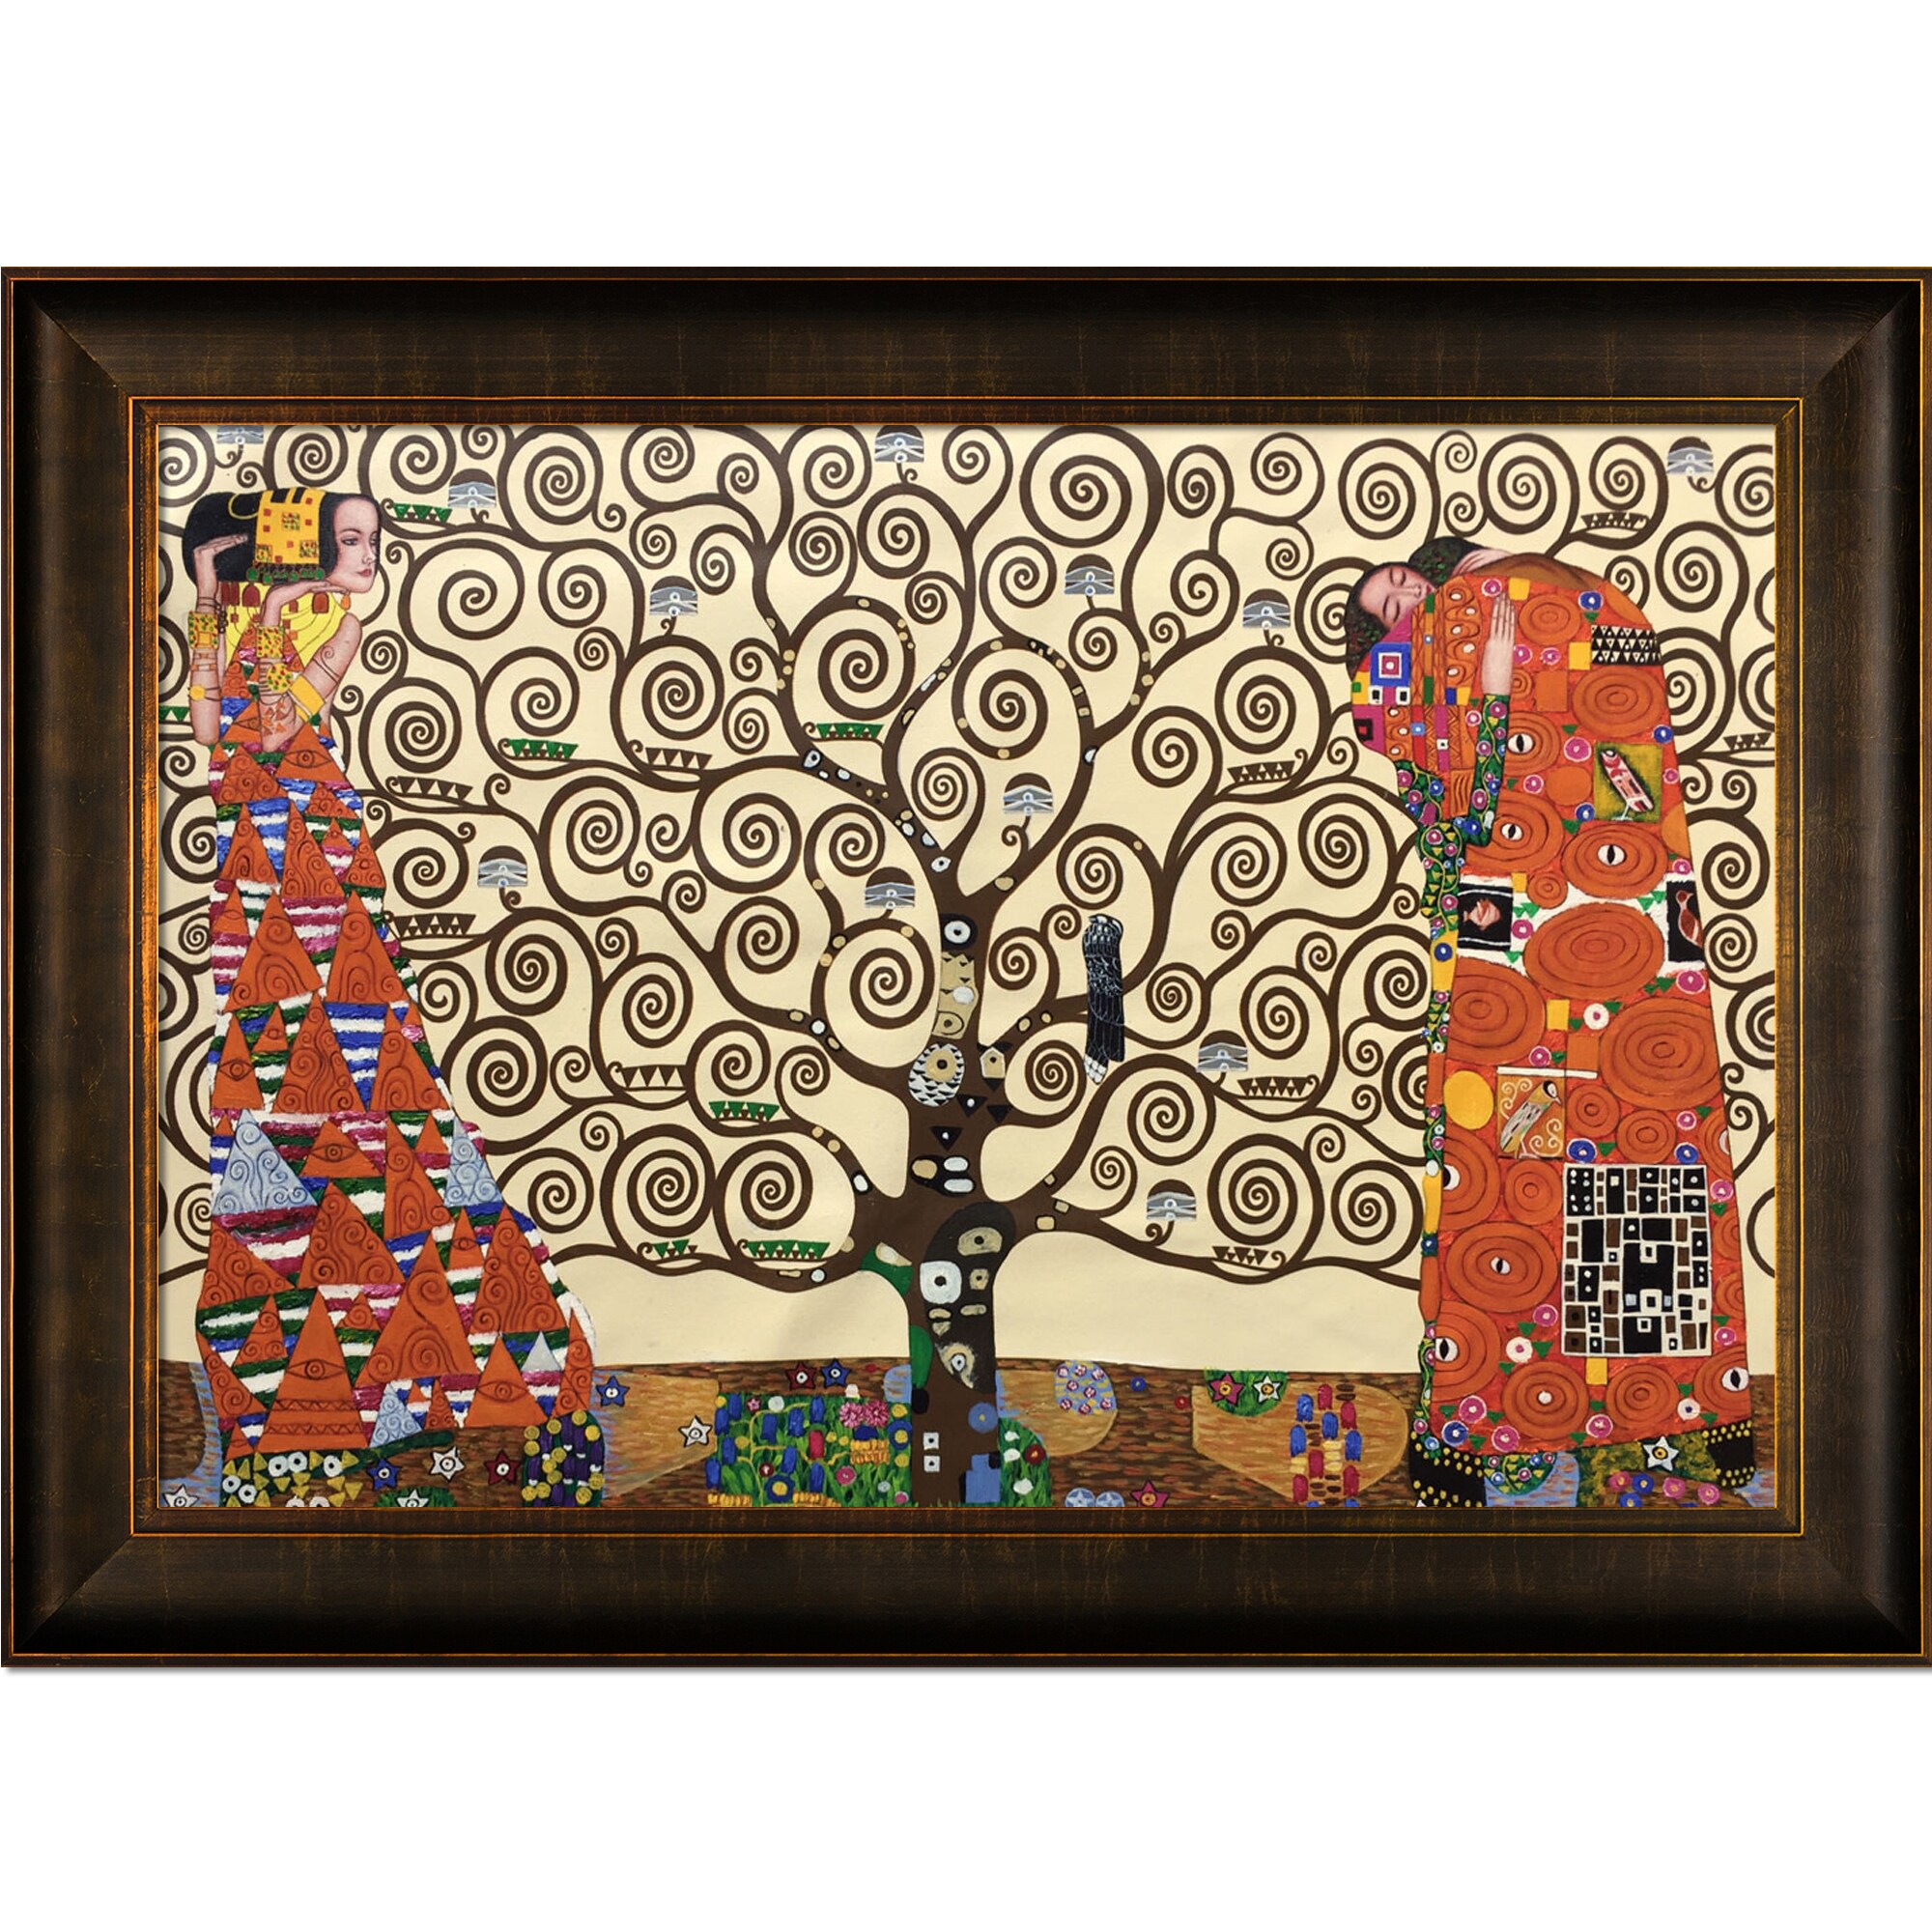 Framed Tree of Life Stoclet Frieze 1909 Maxi Poster 61x91.5 cm 36x24 inches 